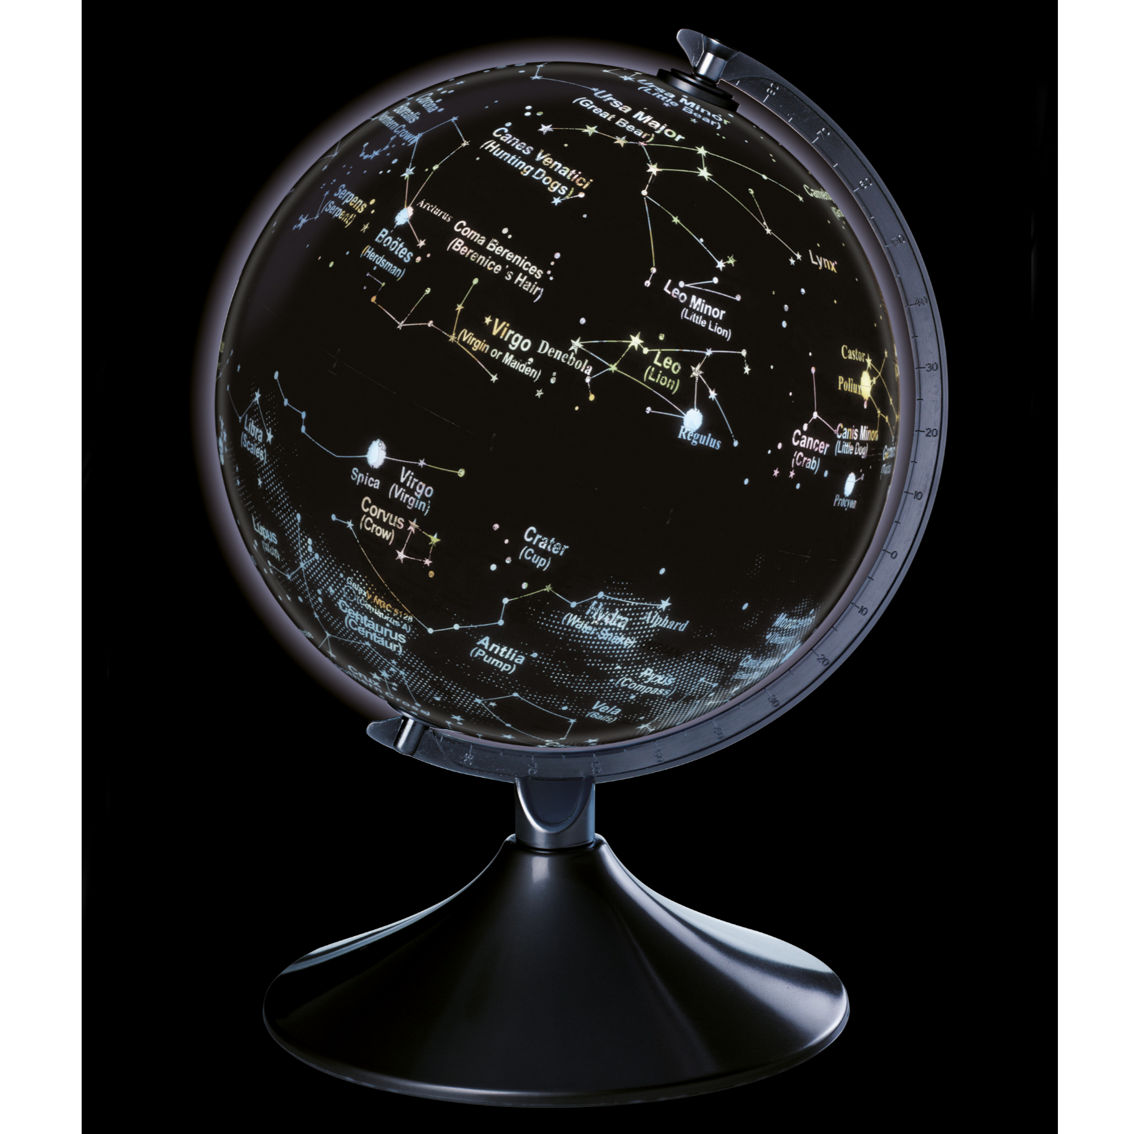 Brainstorm Toys 2 in 1 Globe, Earth and Constellations - Image 2 of 5